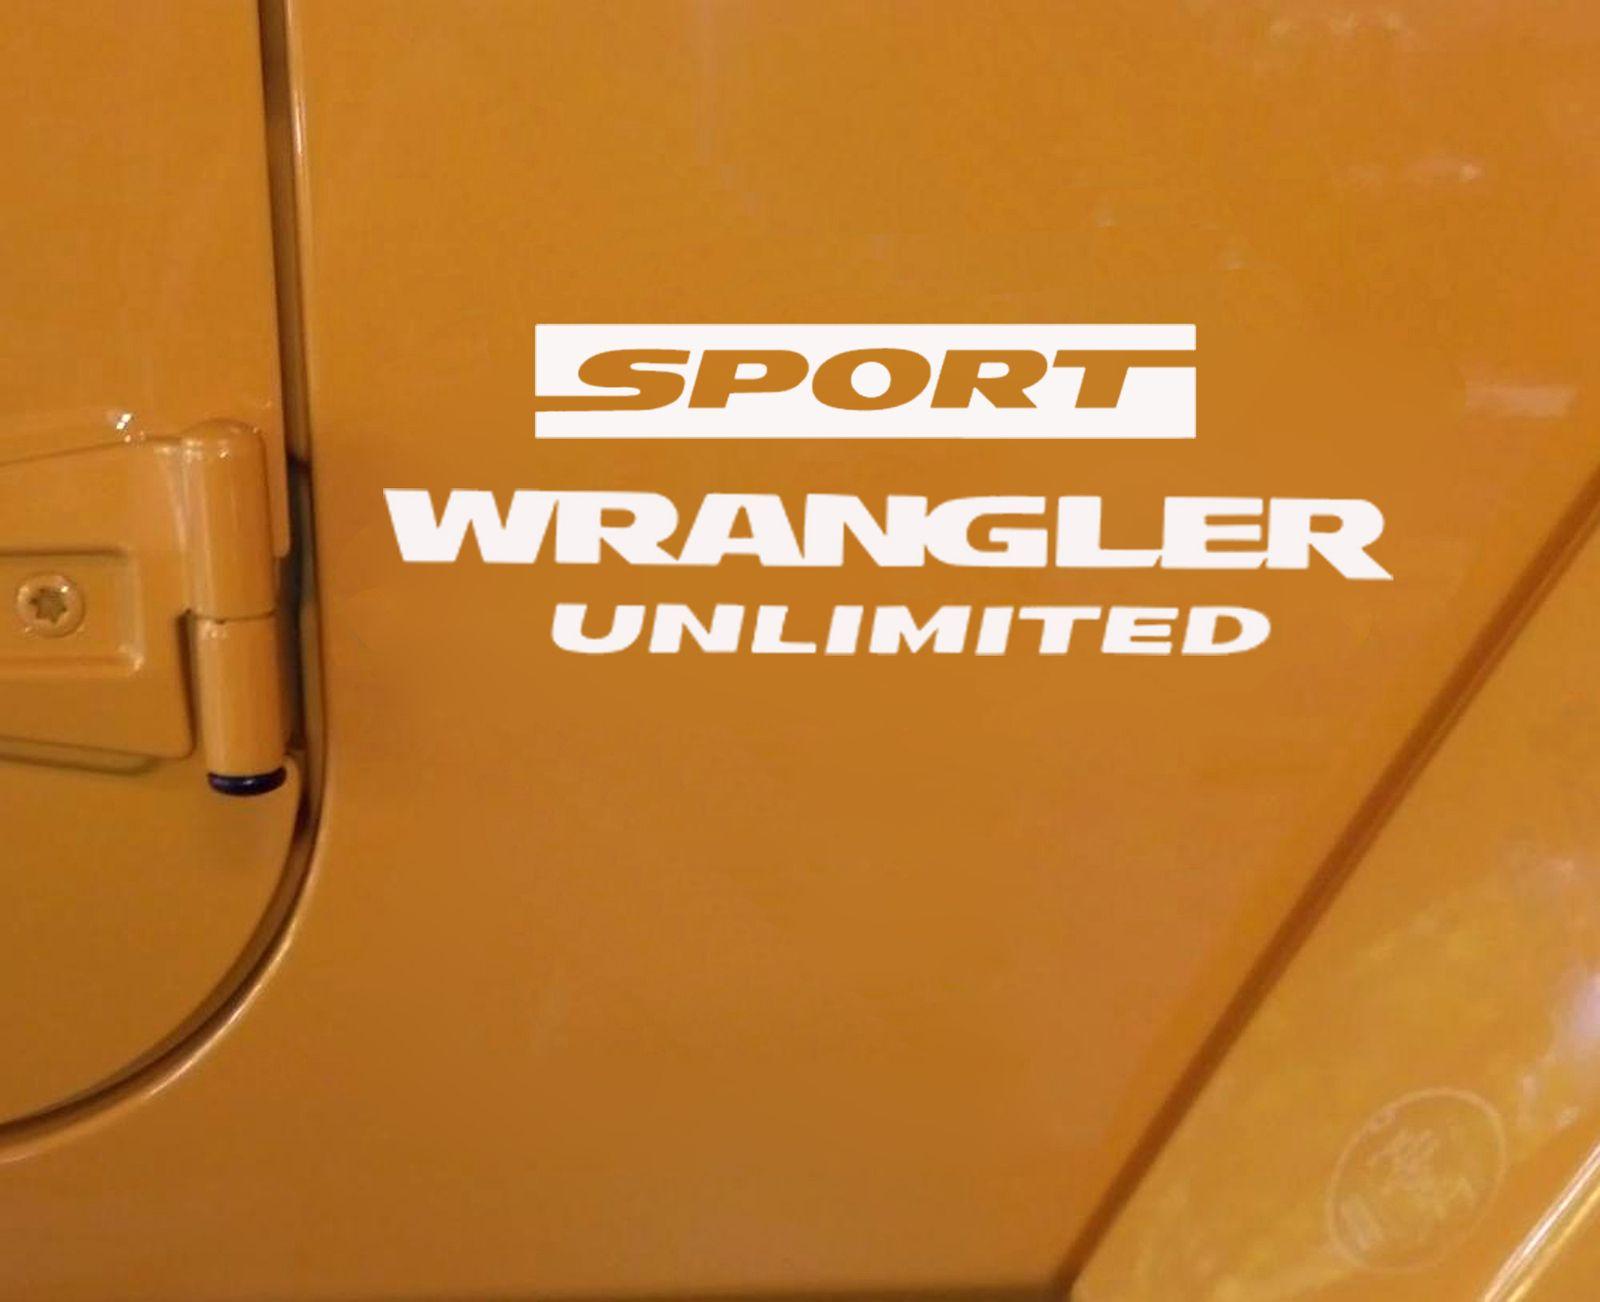 Jeep Wrangler Sport Logo - Jeep Wrangler Unlimited Replacement Stock and 48 similar items